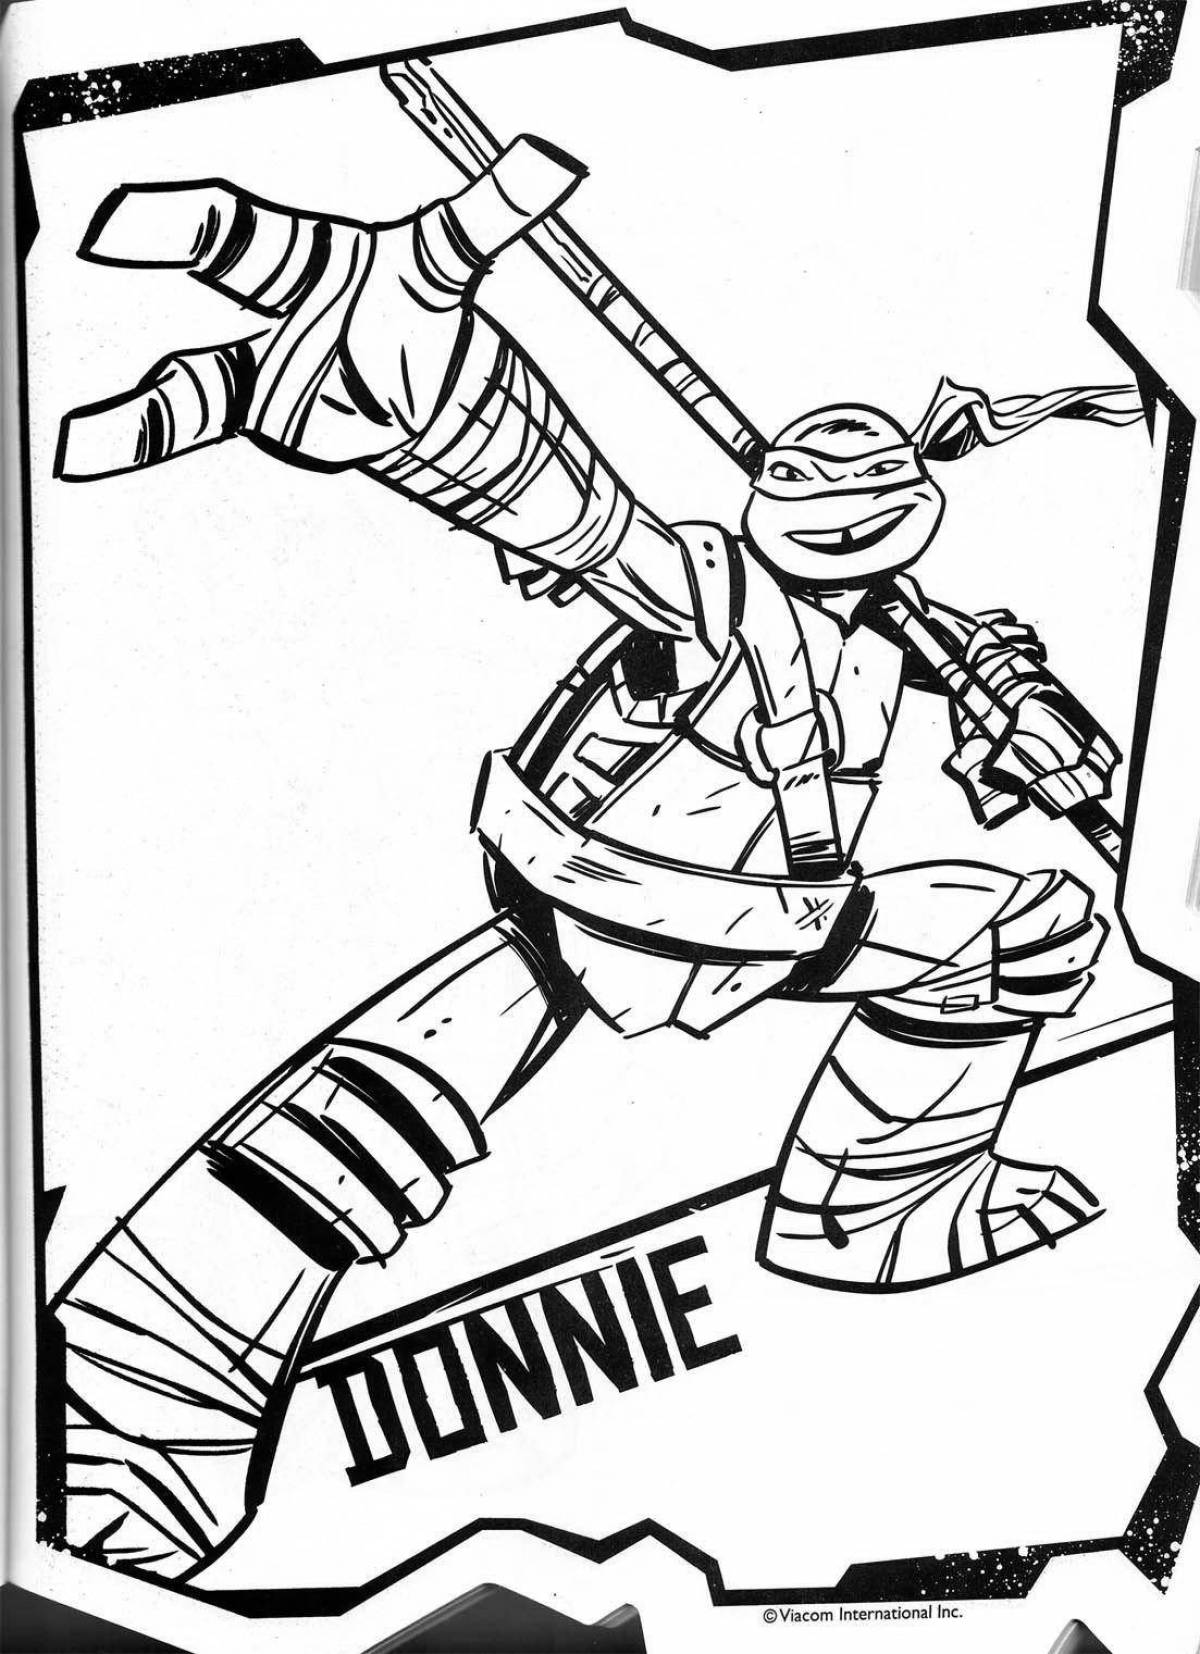 Dazzling donnie turtles coloring book